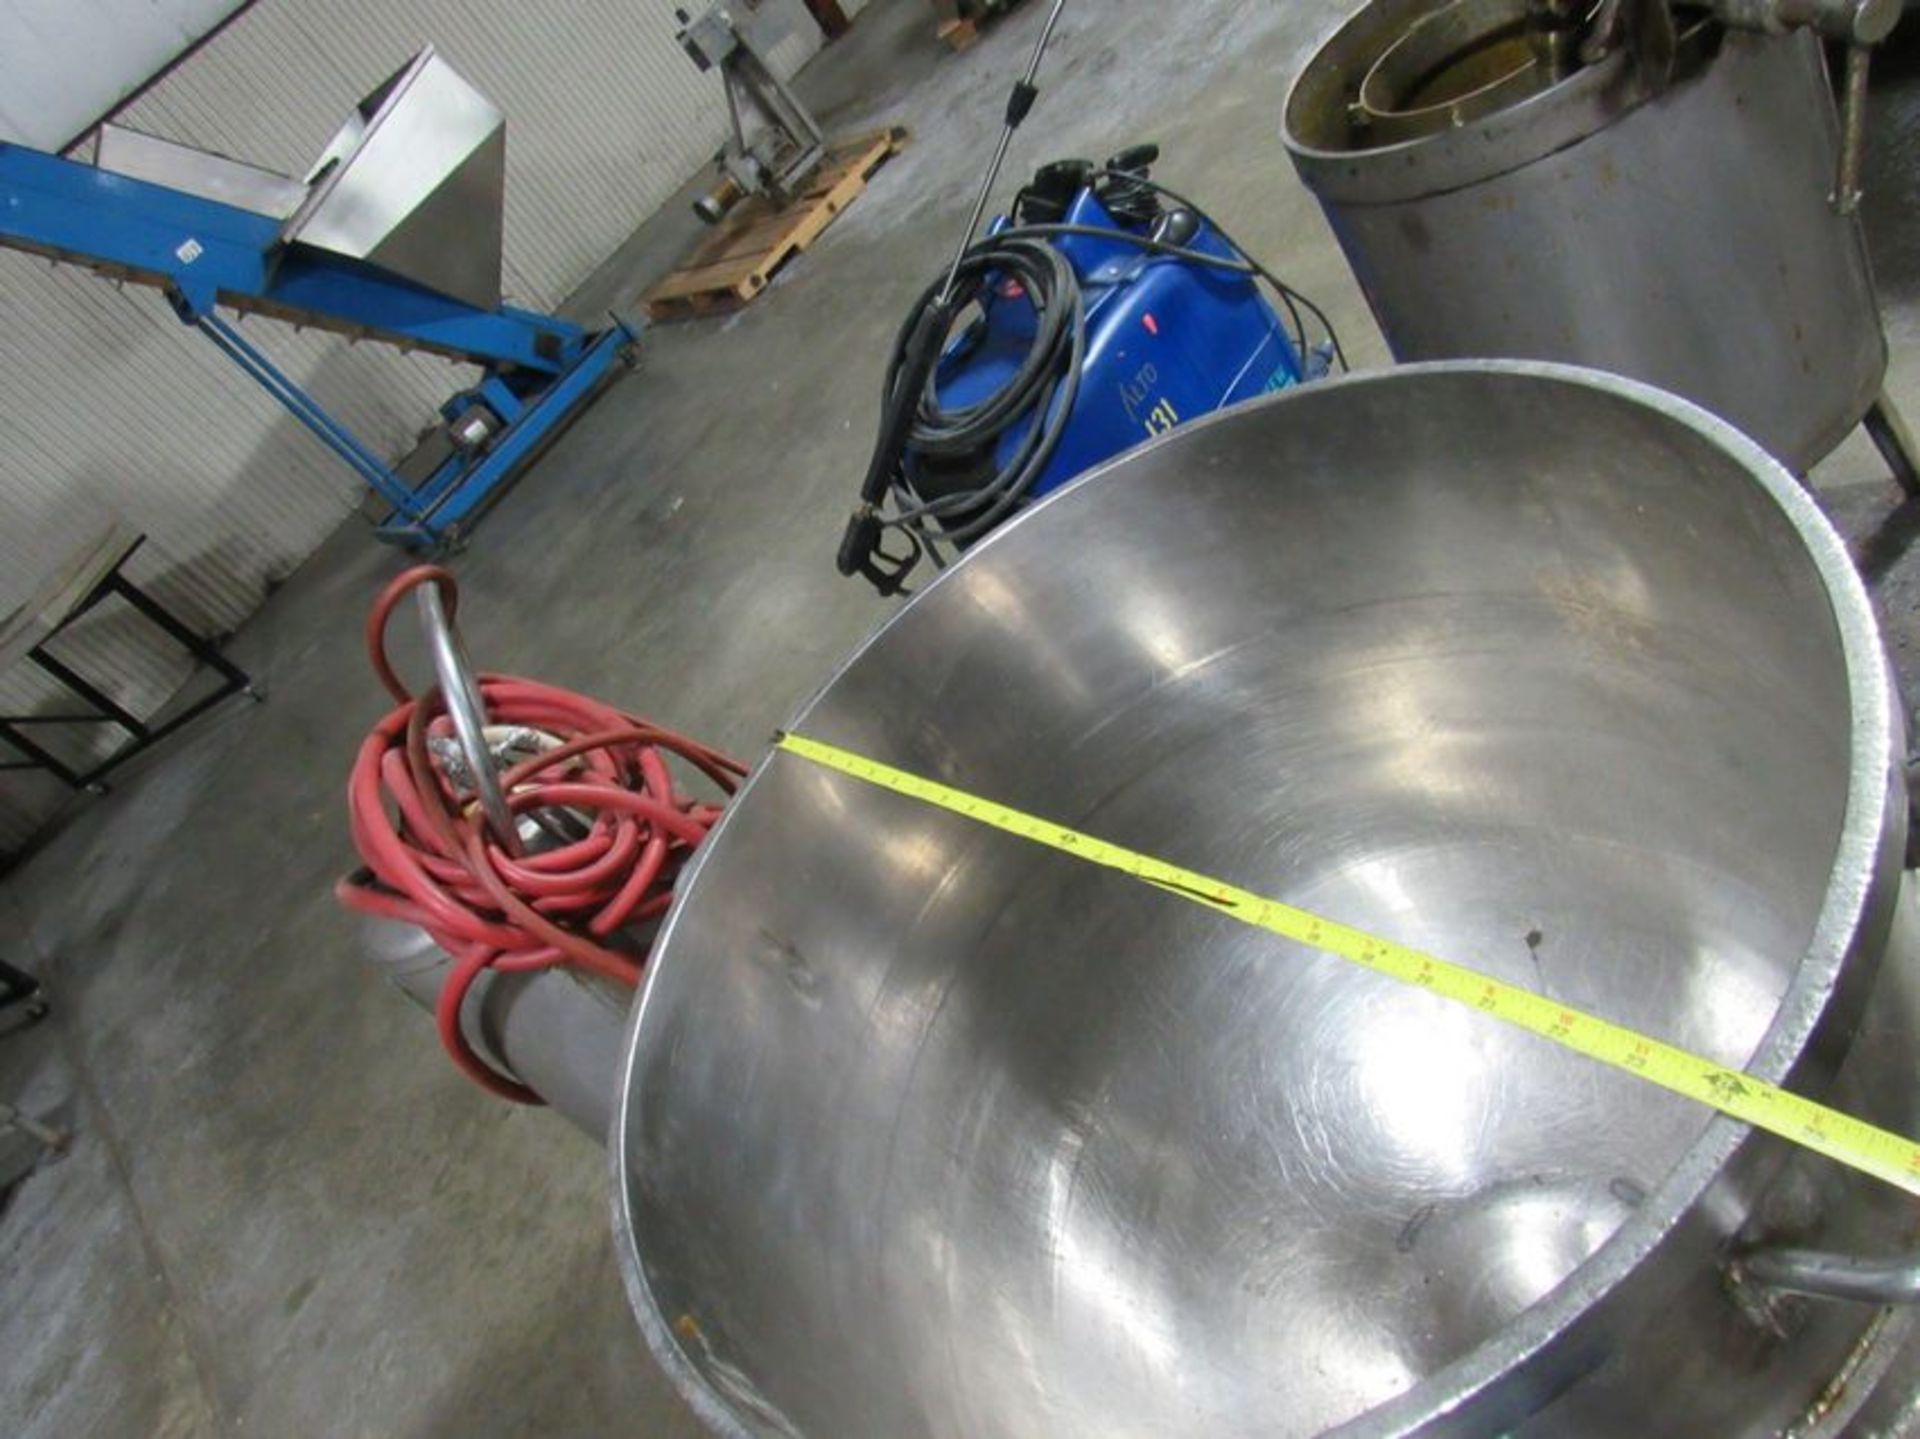 Stainless Steel Bowl and Base on Casters, 19" Diameter, 20" deep - approx. 20 gallons, handles - - Image 3 of 5